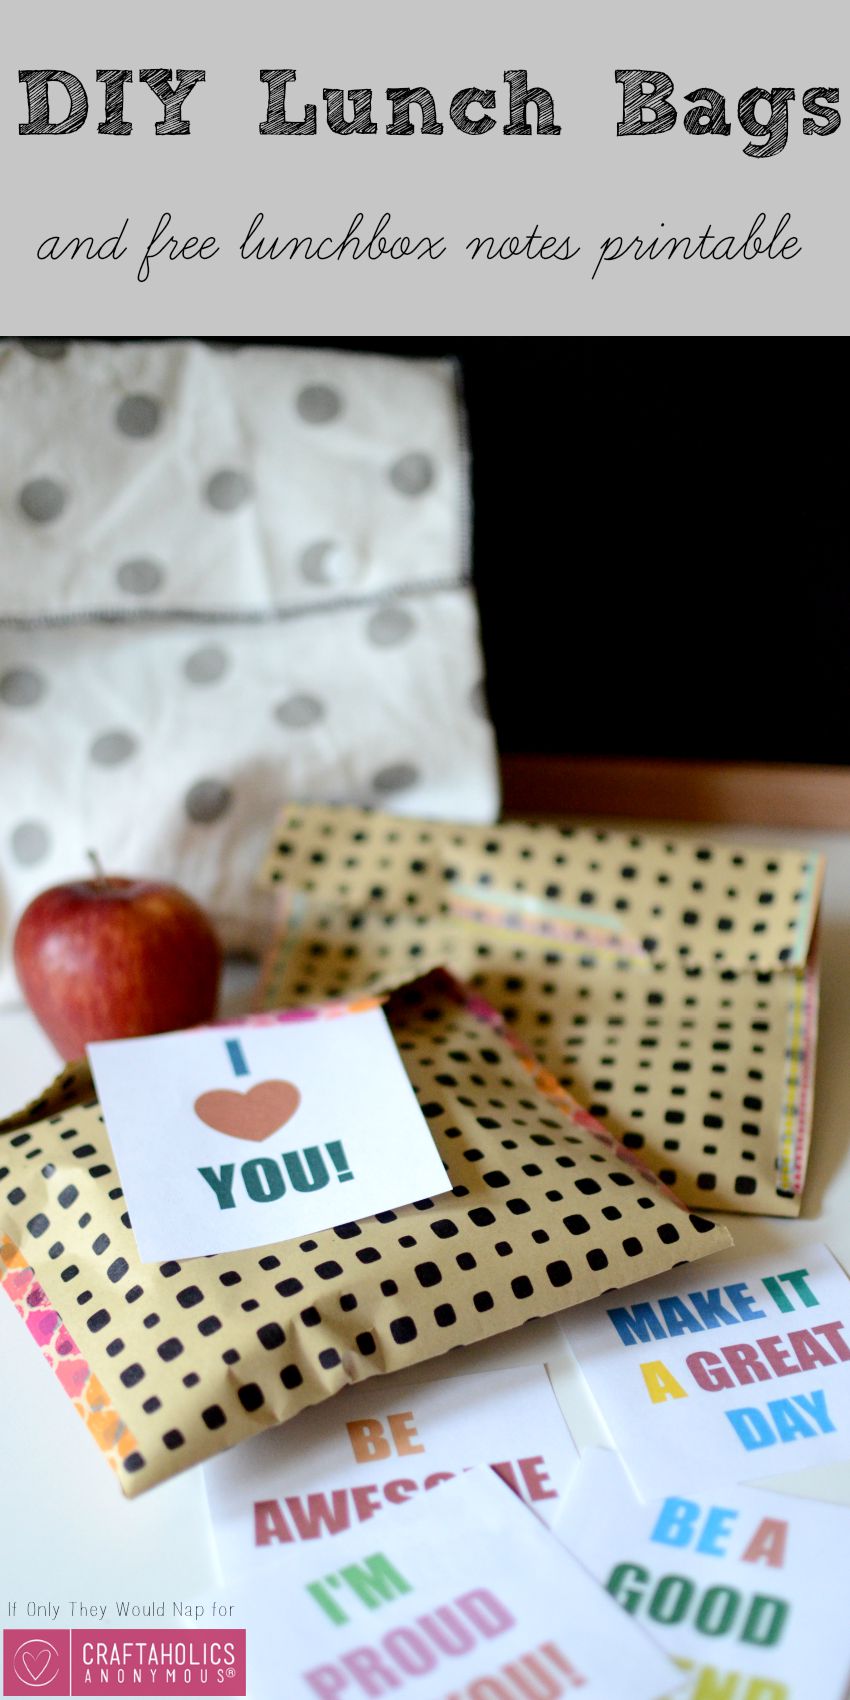 DIY Lunch Bags and free lunchbox notes printable